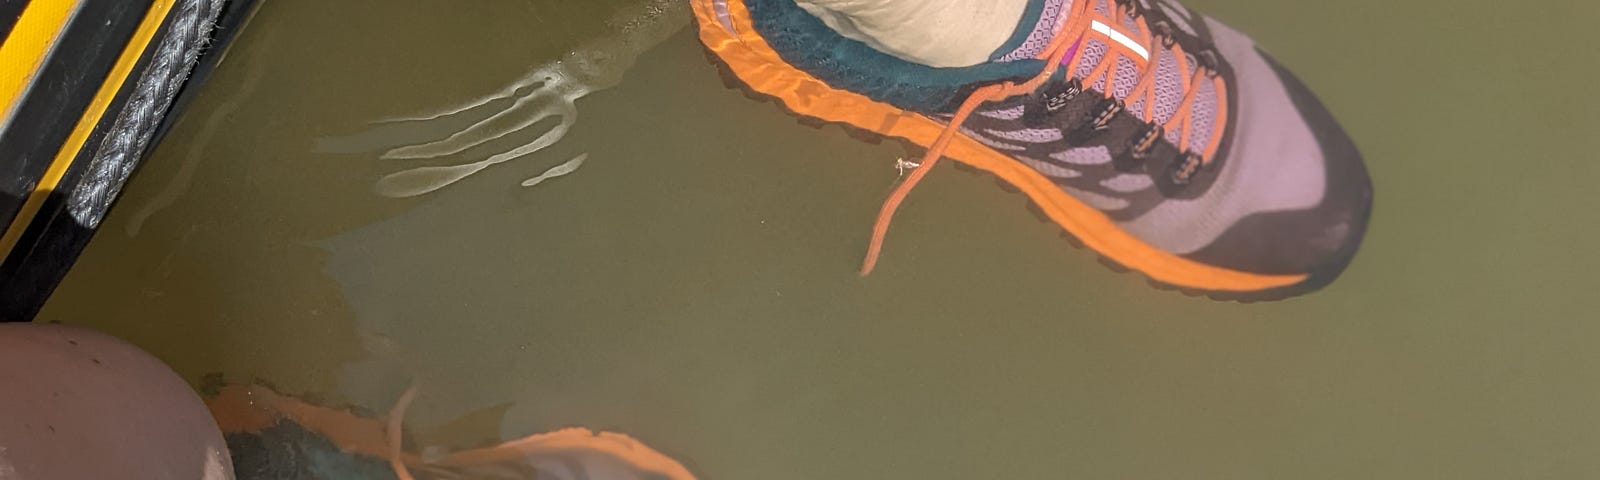 Legs with tennis shoes on floating in a river